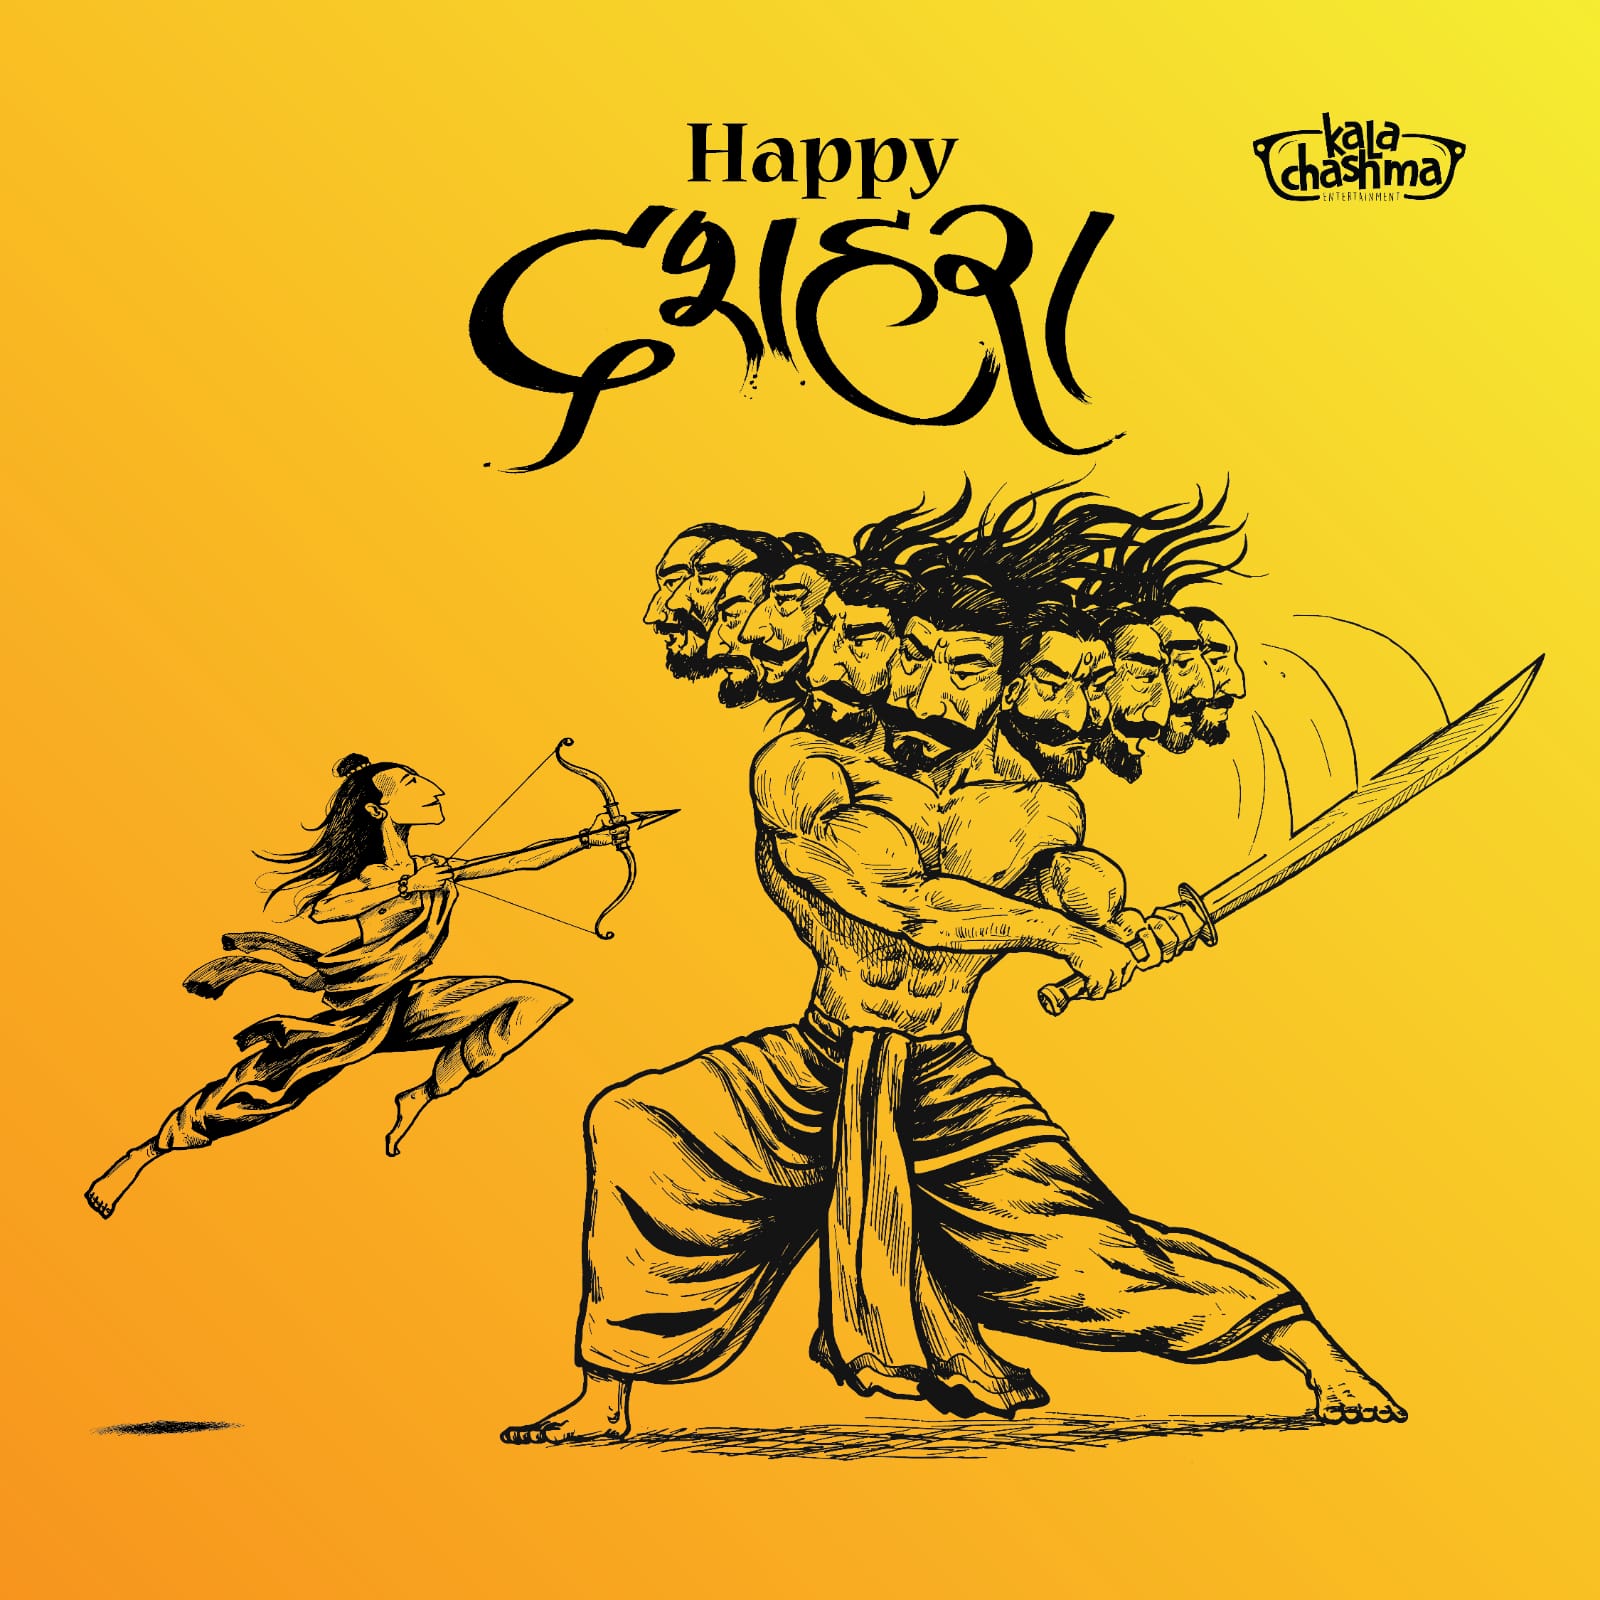 Drawing Archery Man Happy Dussehra PNG Images | PSD Free Download - Pikbest